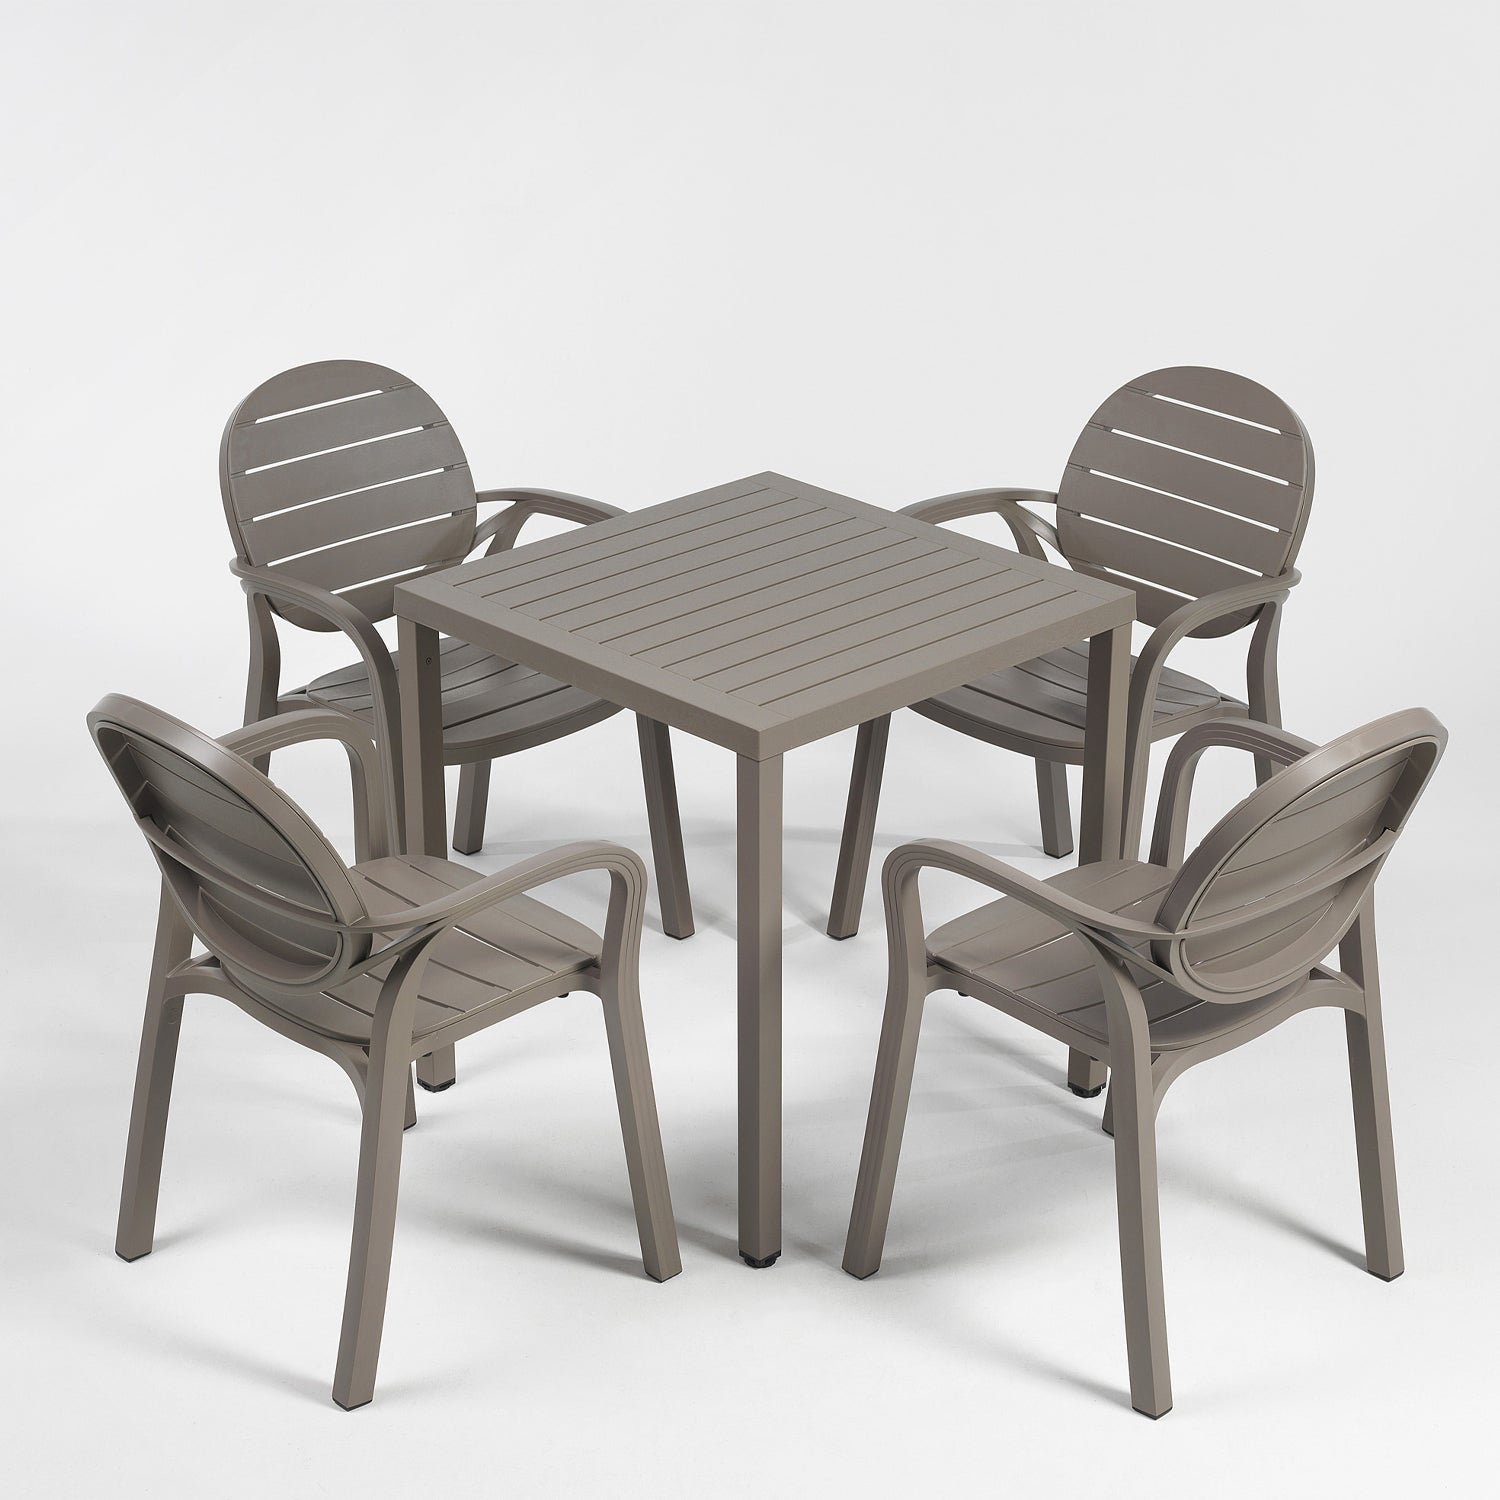 Garden Furniture By Nardi - Available Online